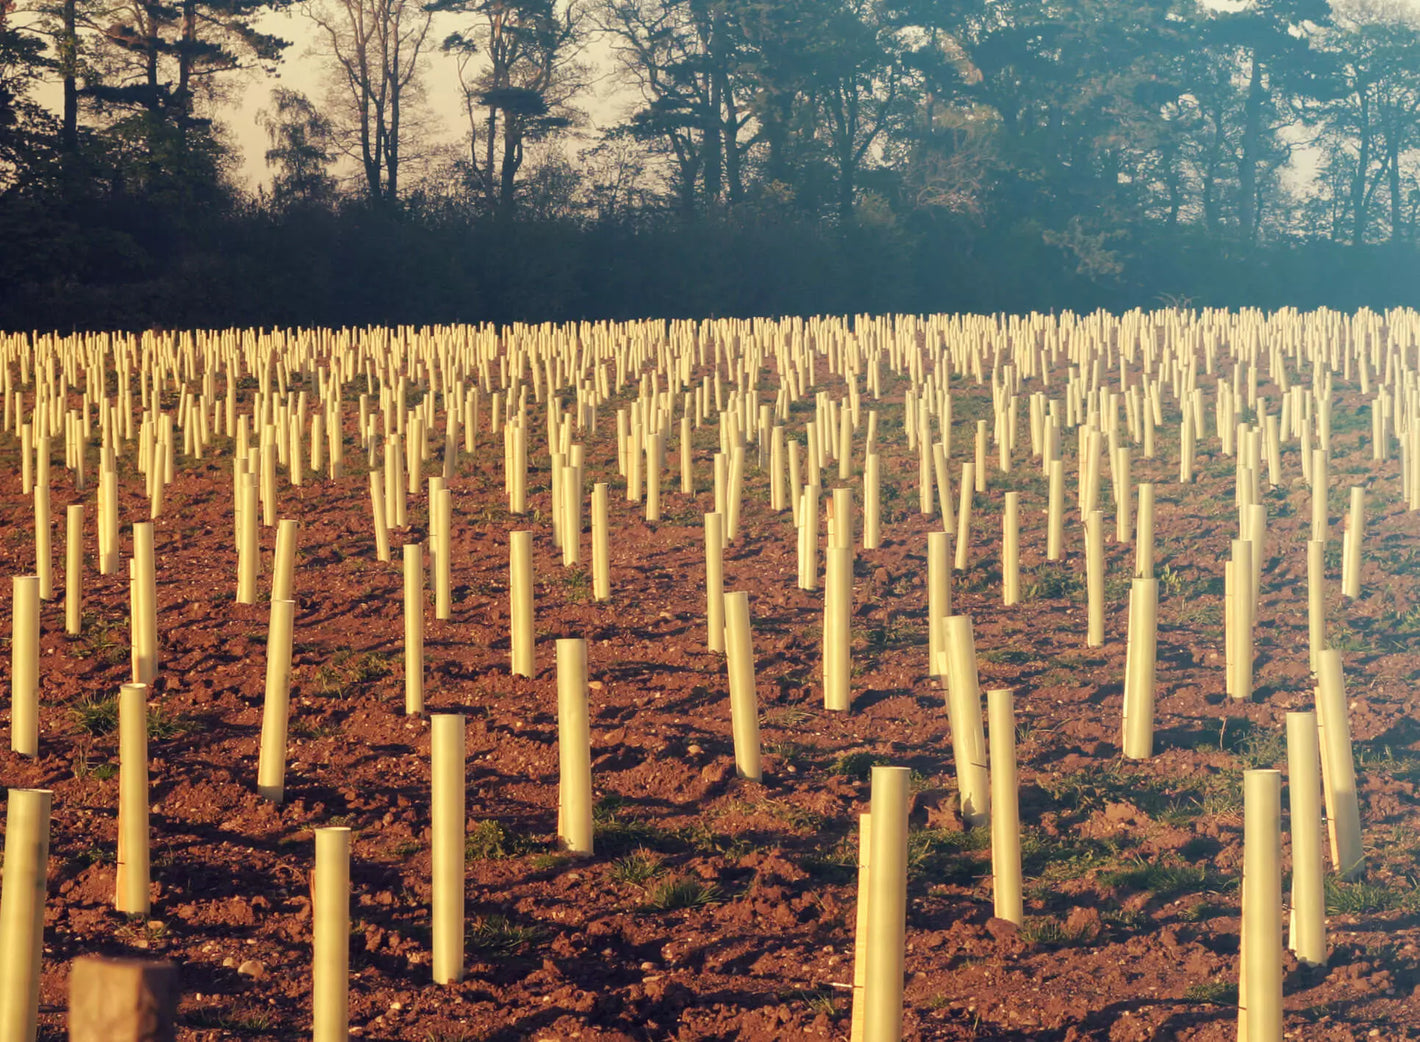 A field of planted trees